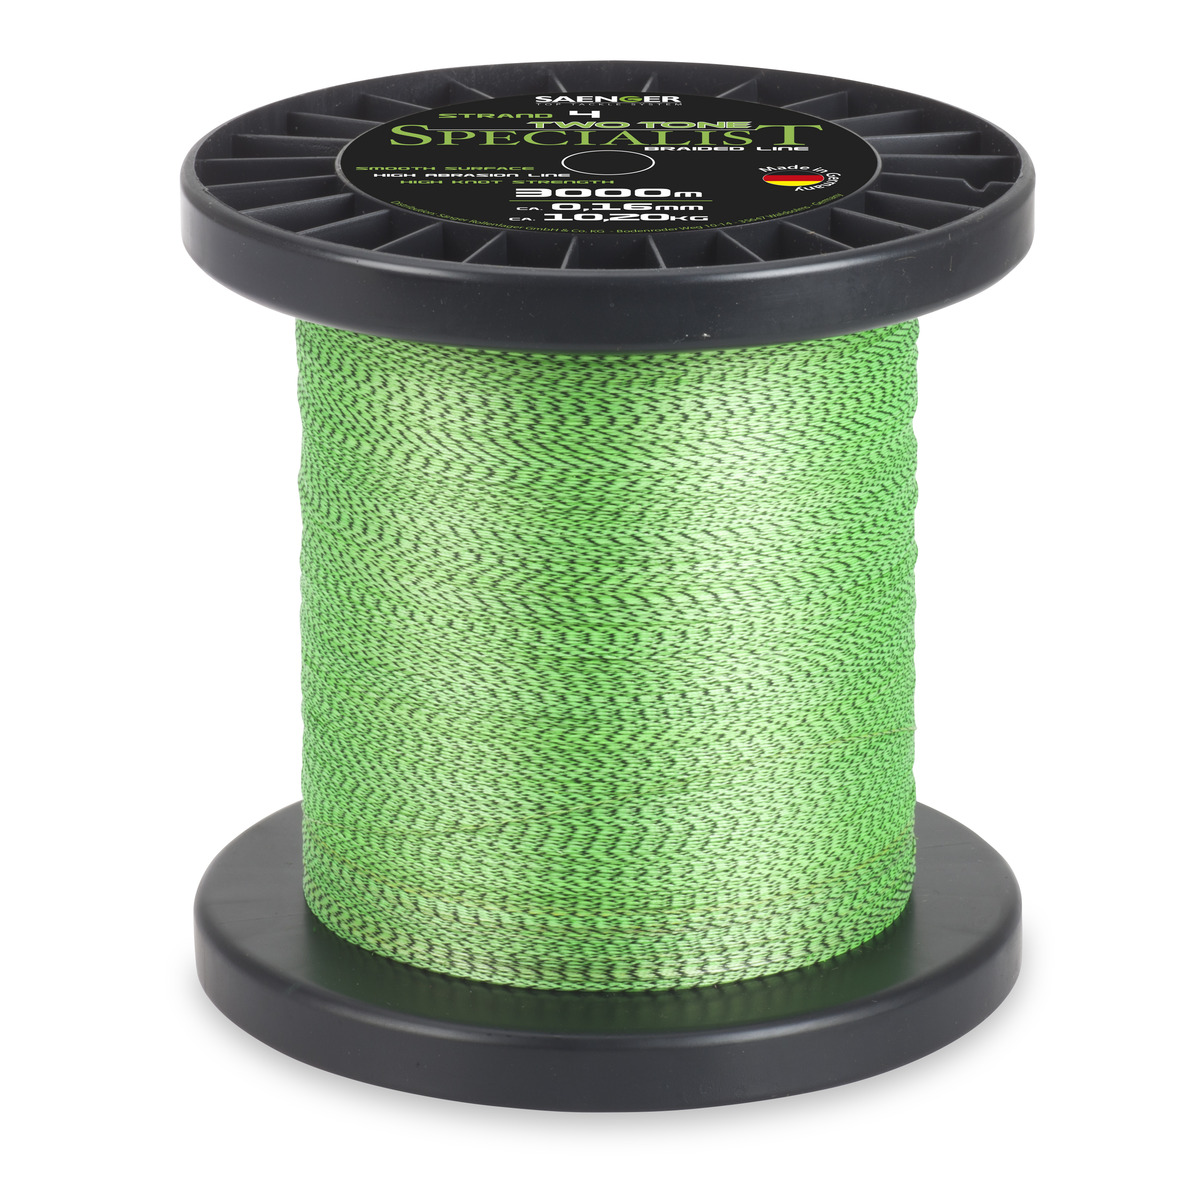 Saenger Specialist Two Tone Fluo Braid - 0,60 mm - 57,9kg 3000 m